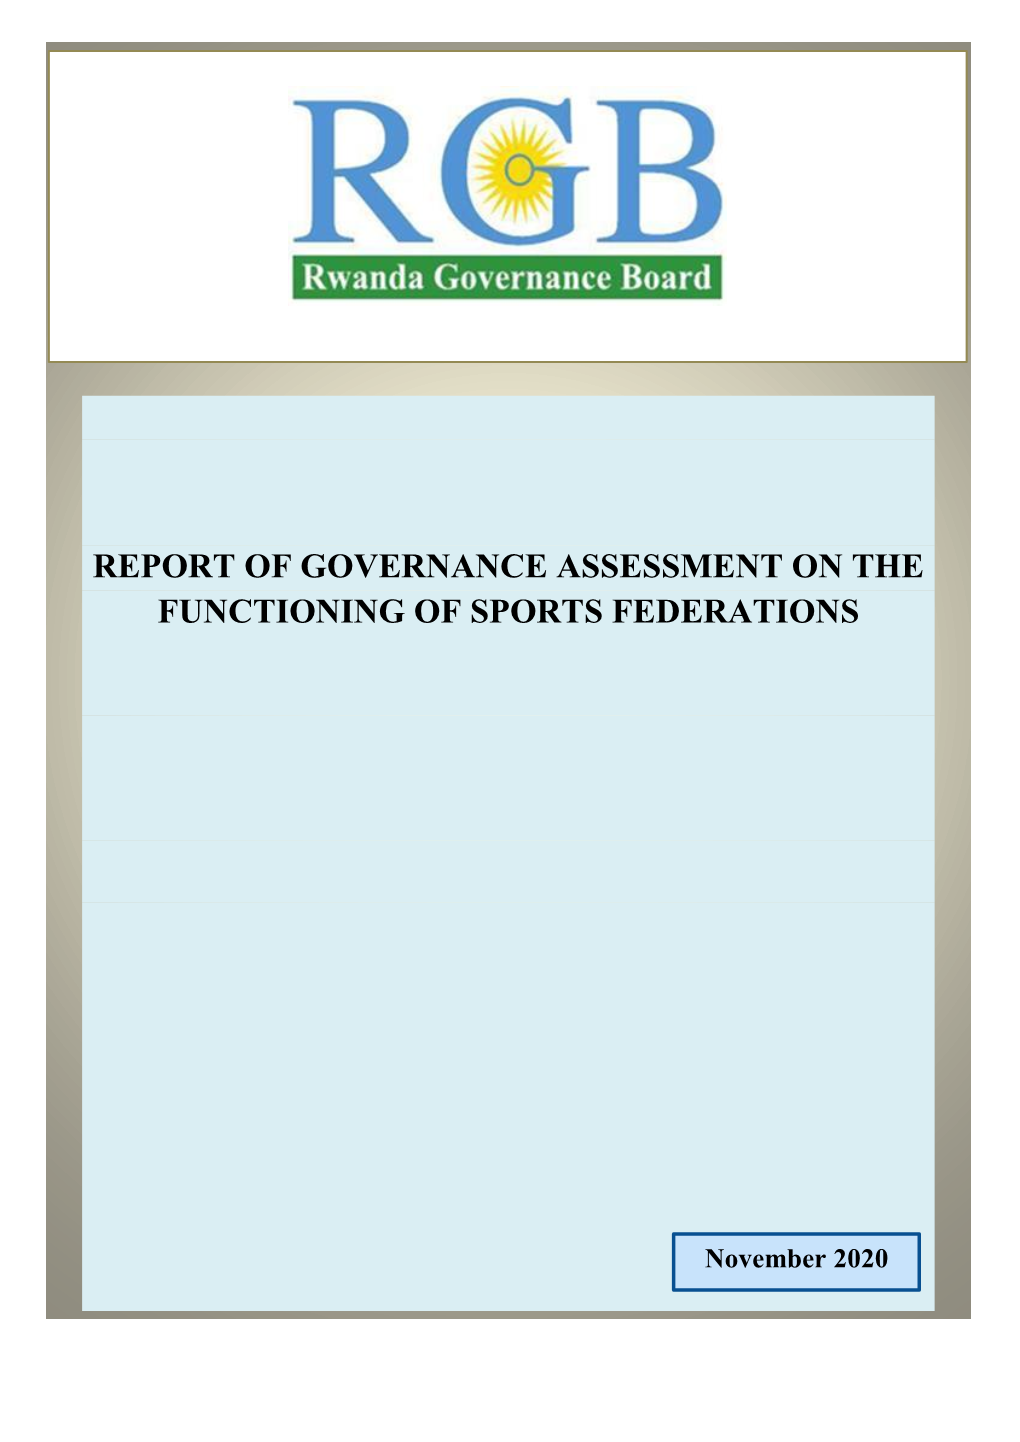 Report of Governance Assessment on the Functioning of Sports Federations